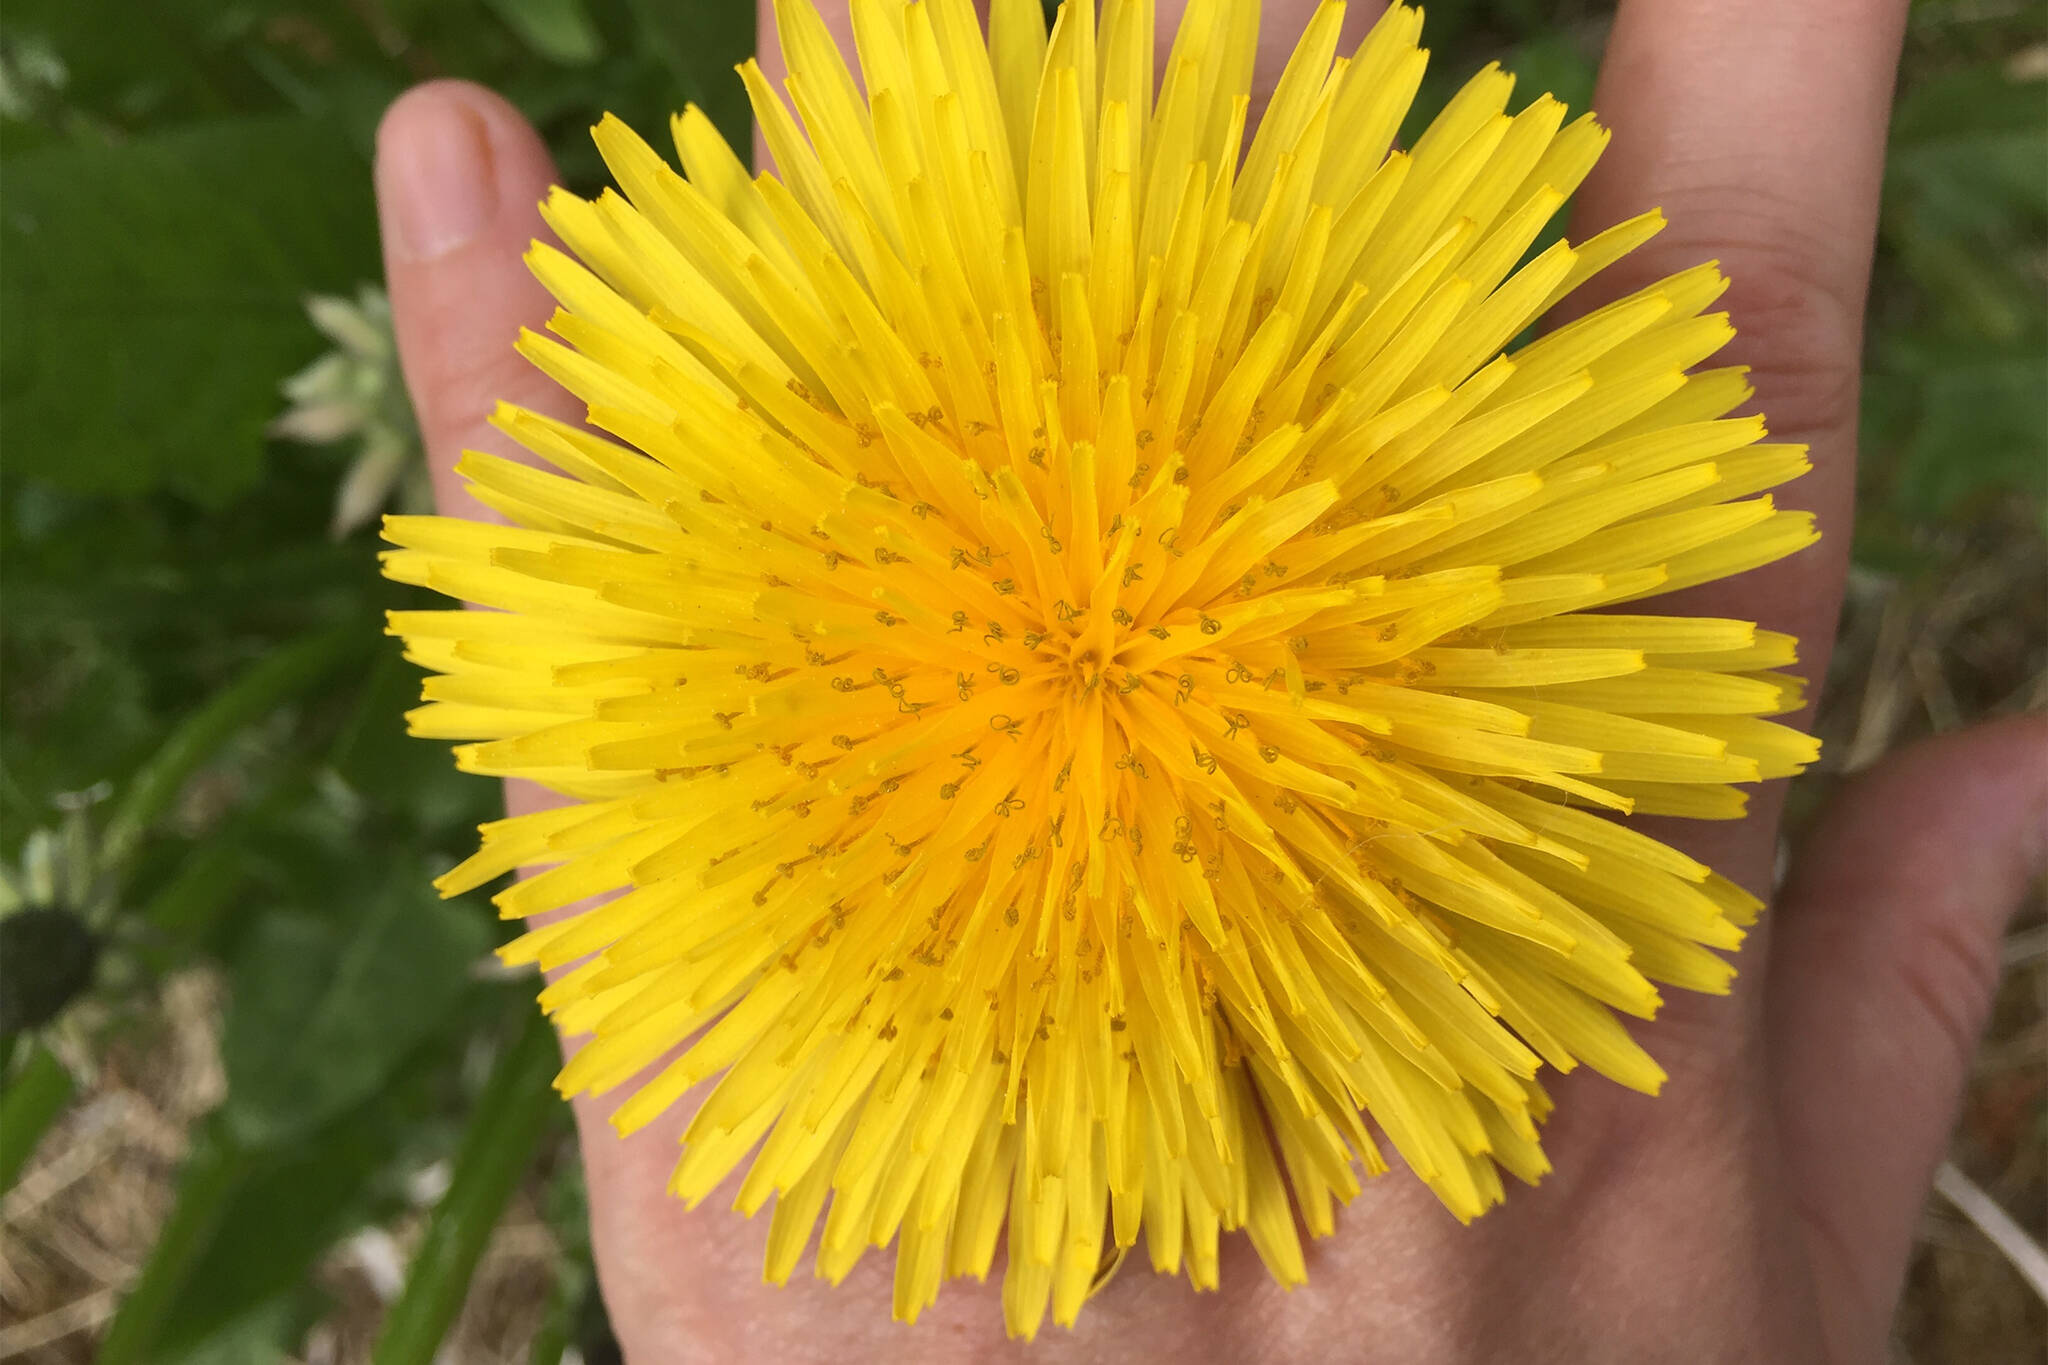 This photo shows a dandelion. "During spring’s root season, people dig up and dry dandelion root, then ground it for coffee, claiming it’s a good substitute." writes By Yéilk’ Vivian Mork. (Yéilk’ Vivian Mork / For the Capital City Weekly)